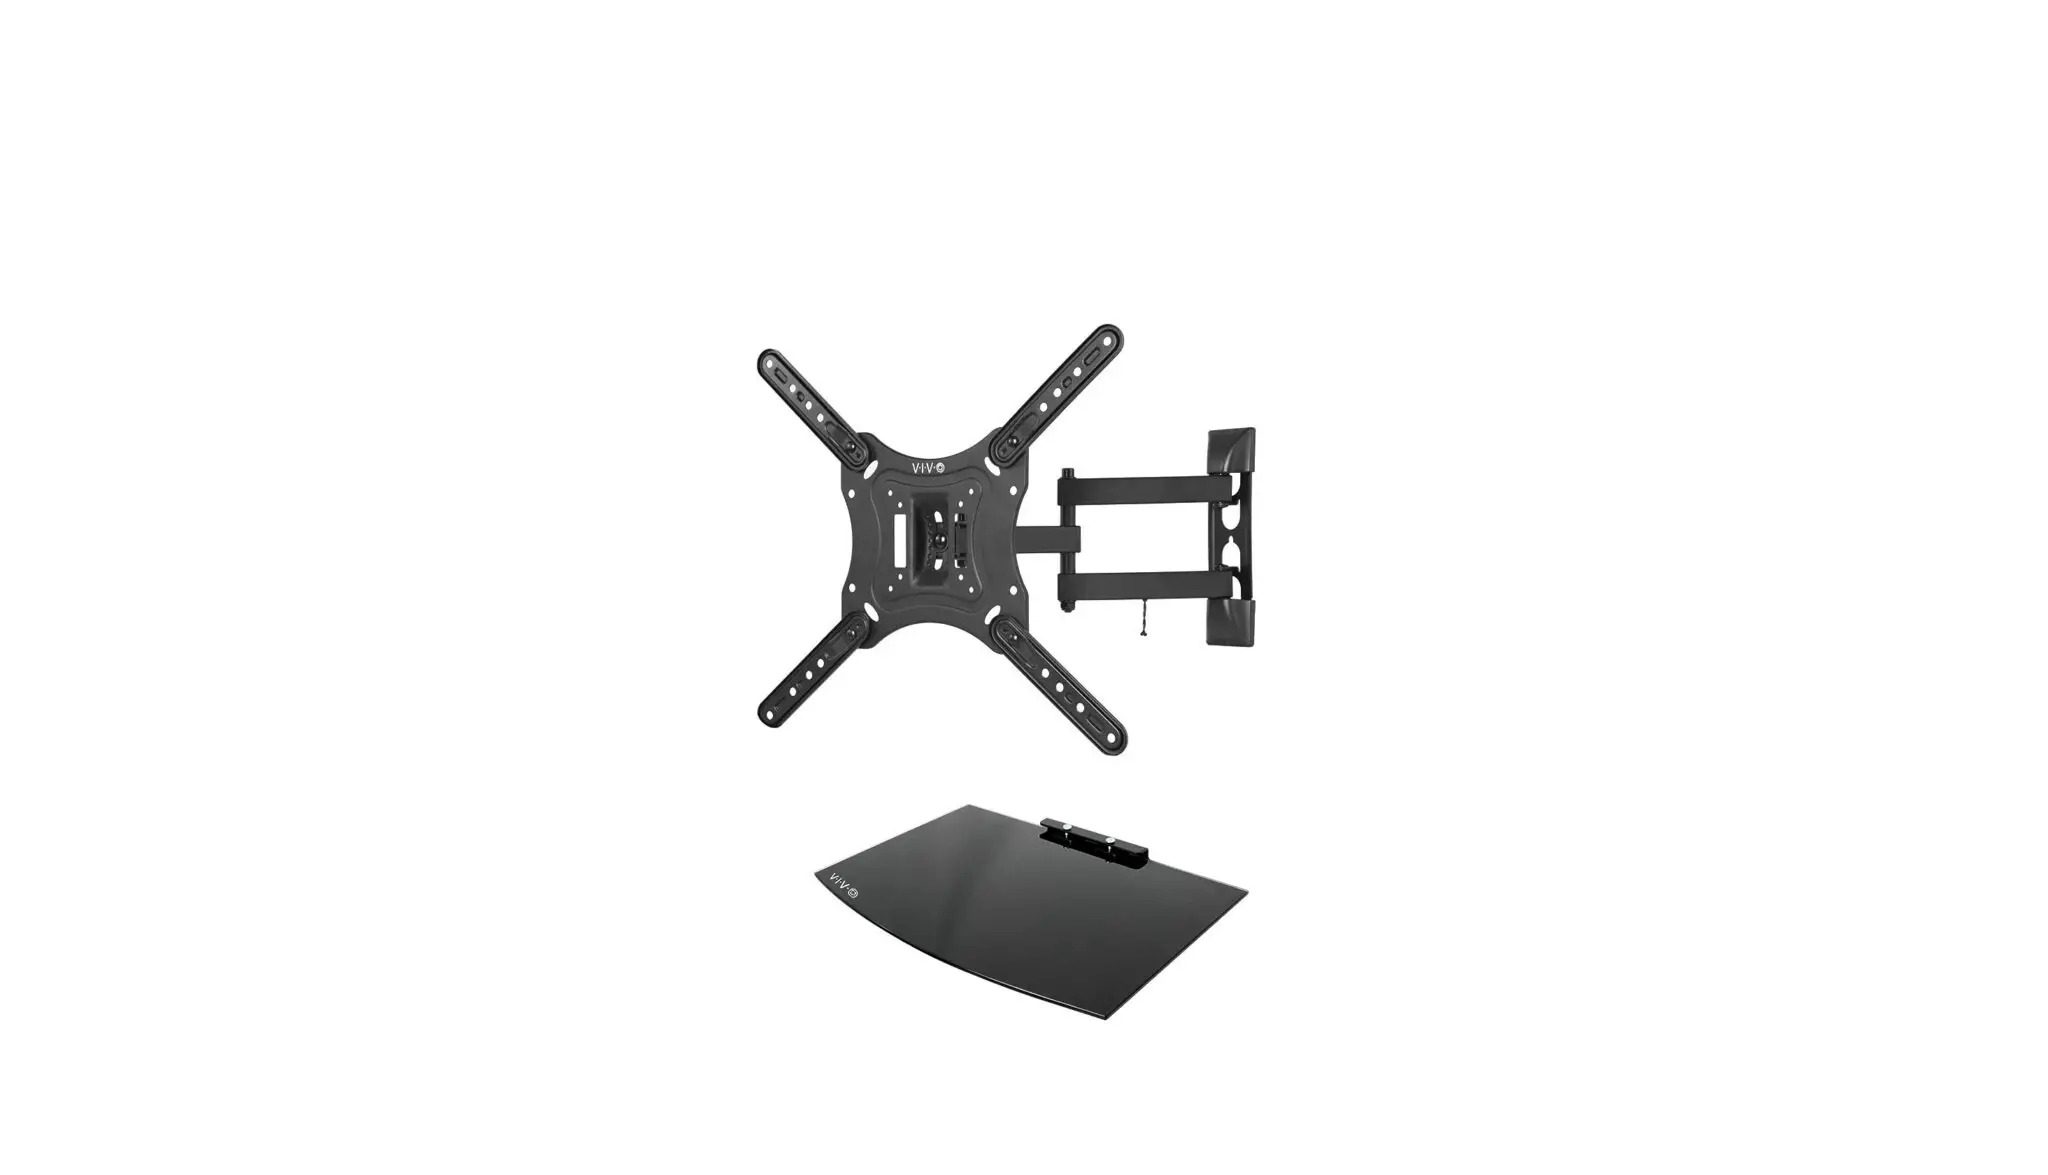 MOUNT-VWSF1,W Wall Mount for 23 Inch to 55 Inch TVs